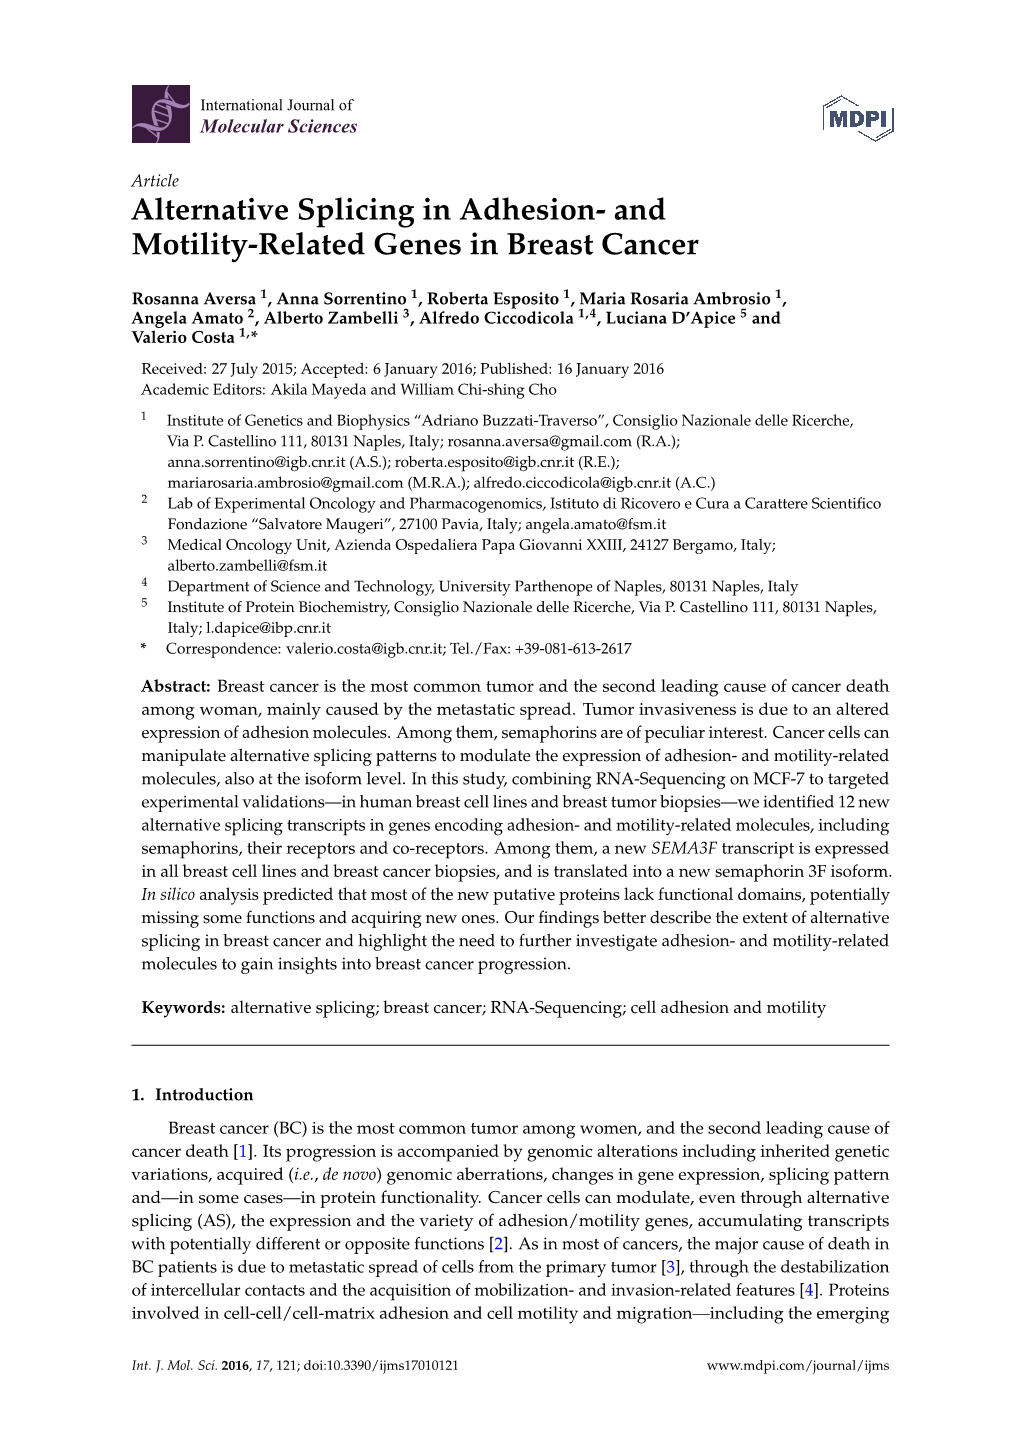 Alternative Splicing in Adhesion-And Motility-Related Genes in Breast Cancer